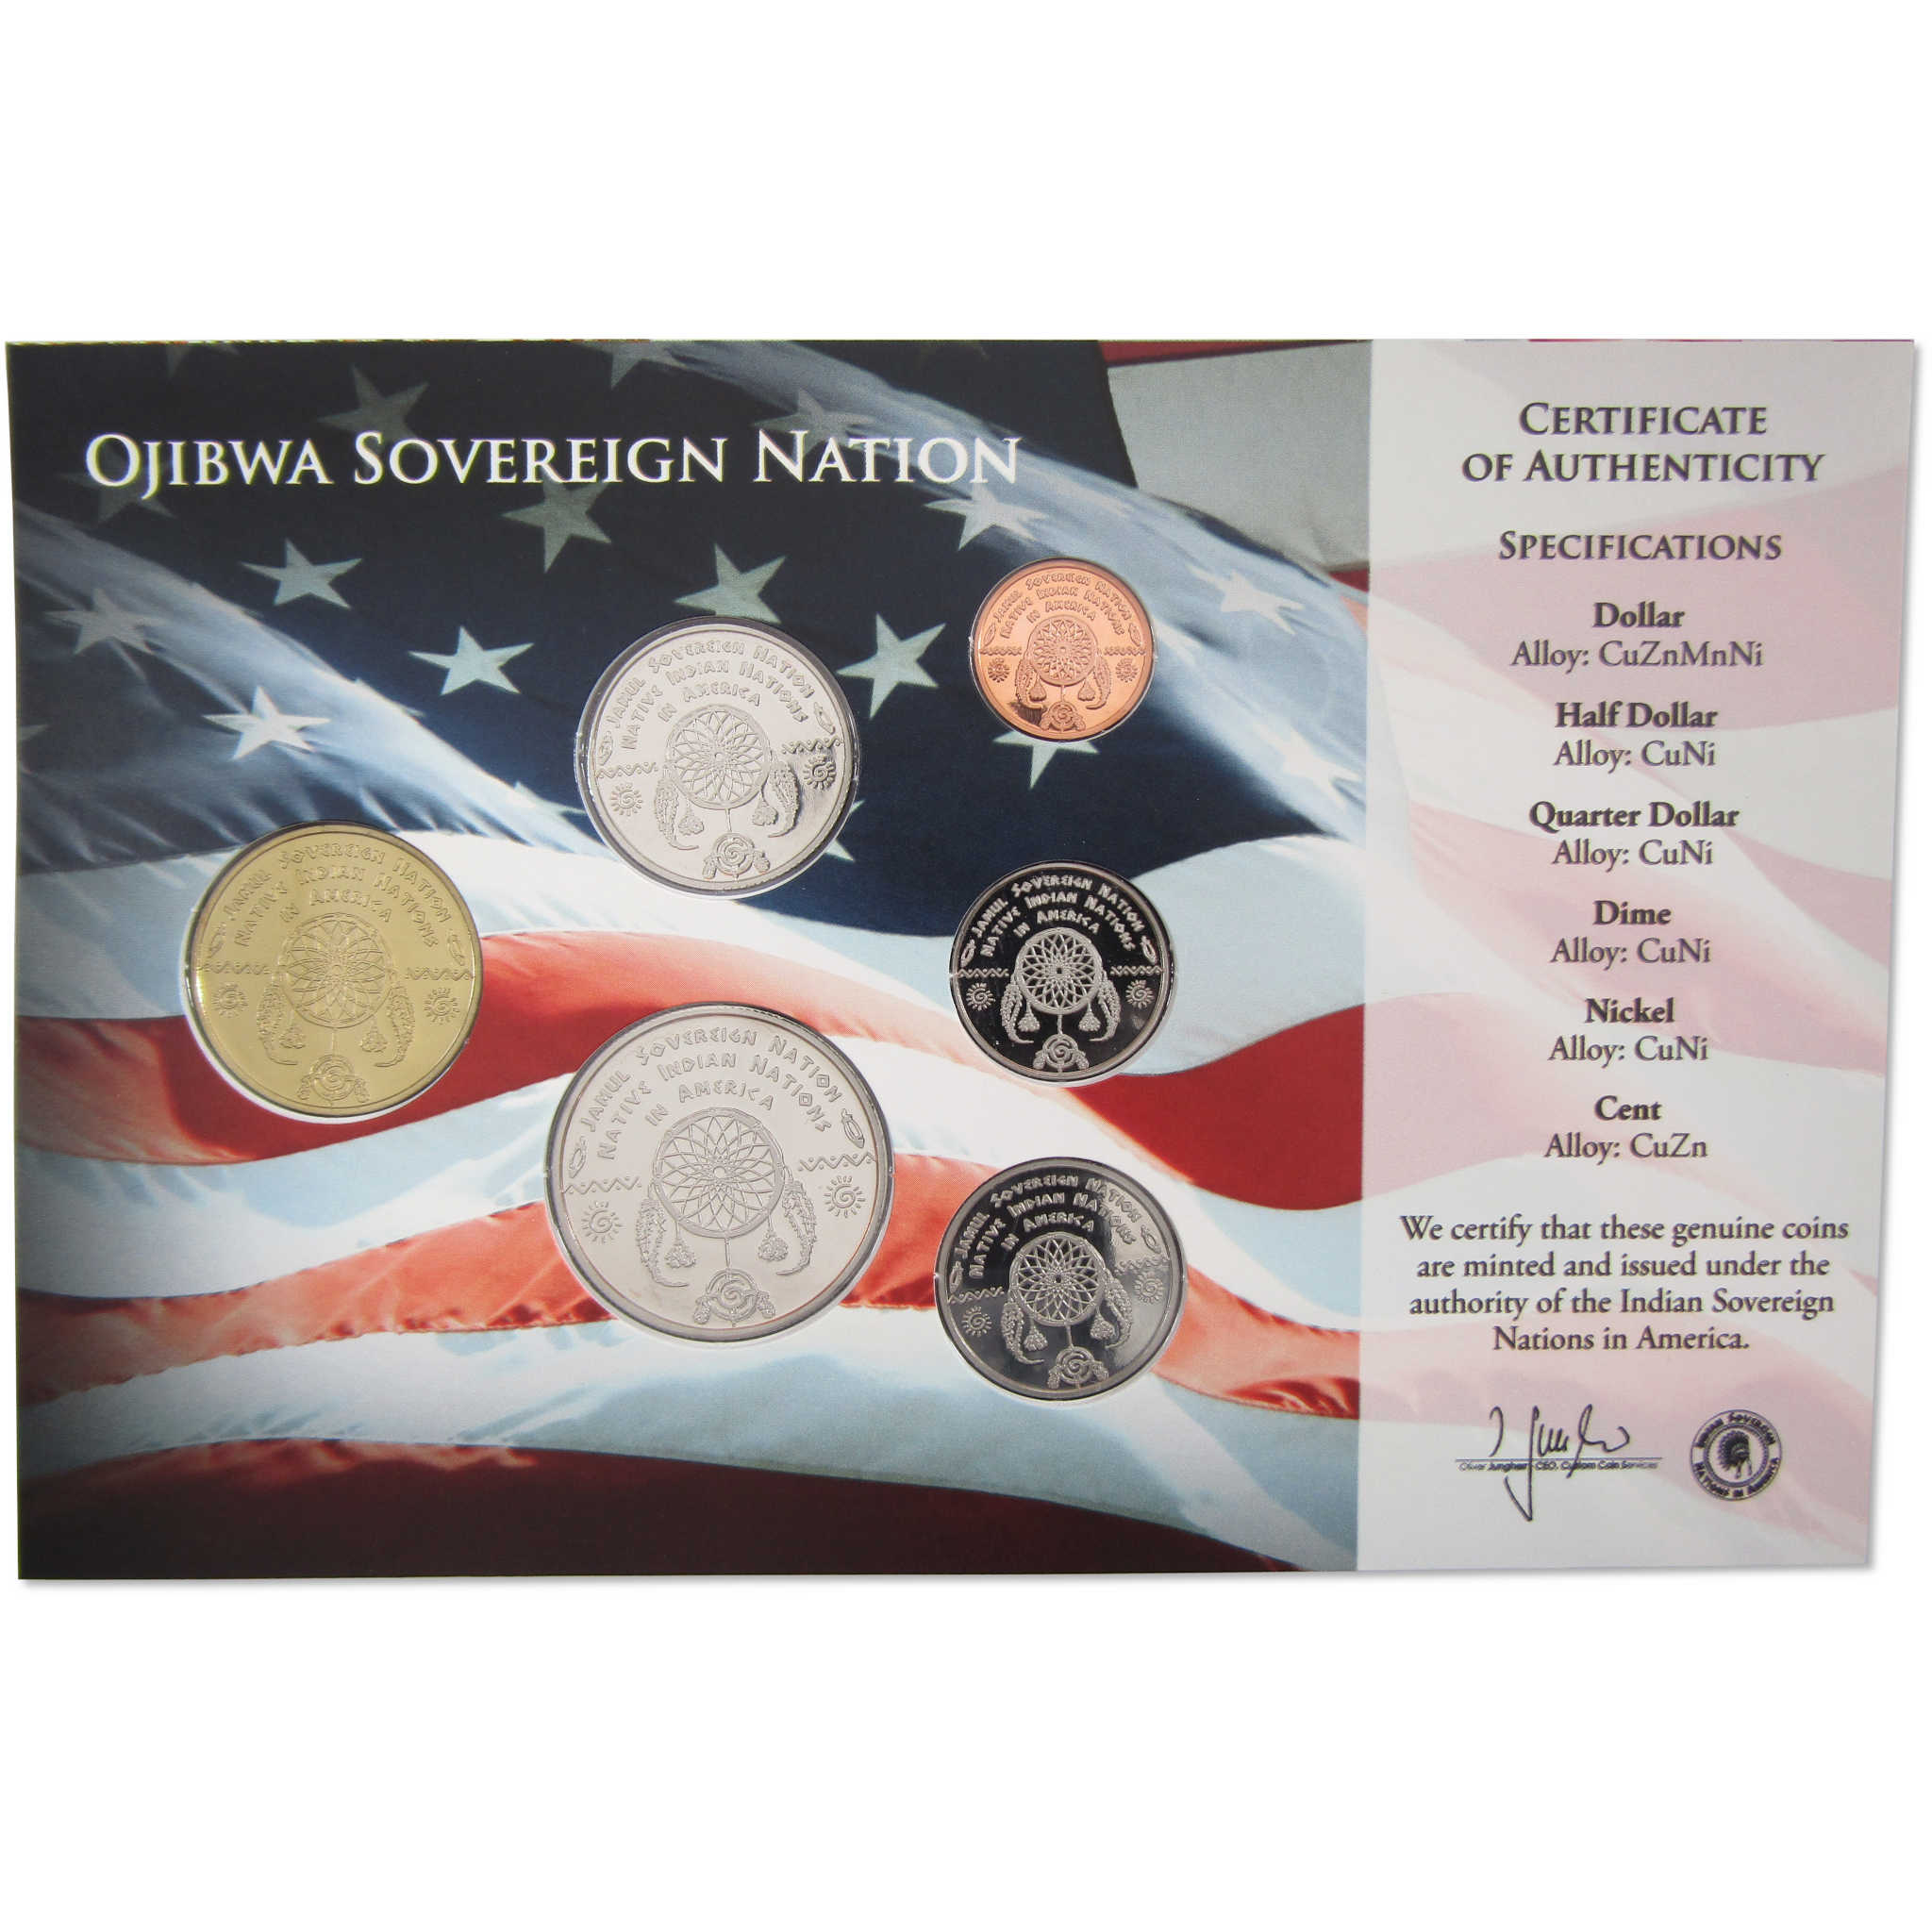 2020 Jamul Native American Ojibwa Sovereign Nation Uncirculated Coin Set